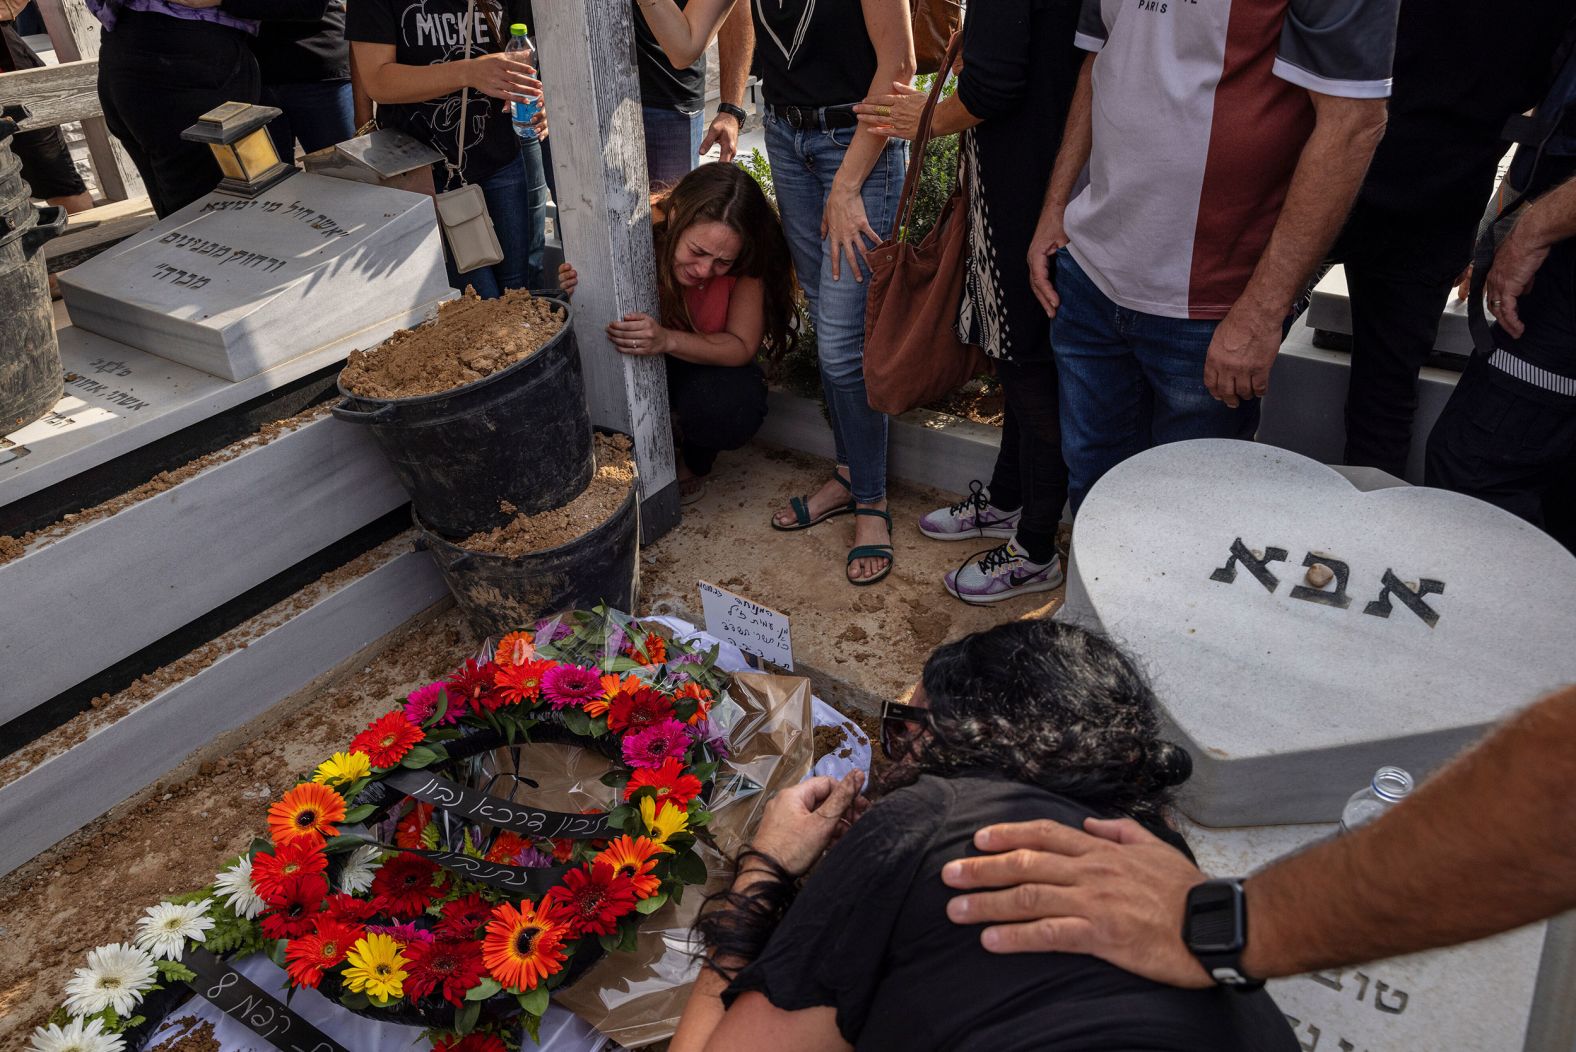 People mourn at the grave of paramedic Amit Man during her funeral in Netivot, Israel, on Tuesday, October 10. She was fatally shot along with patients she was treating in Be'eri, Israel. The self-sustaining farming community near Gaza was <a href="index.php?page=&url=https%3A%2F%2Fwww.cnn.com%2F2023%2F10%2F10%2Fmiddleeast%2Fisrael-beeri-bodies-found-idf-intl-hnk%2Findex.html" target="_blank">one of the first places targeted by Hamas militants</a> on Saturday.